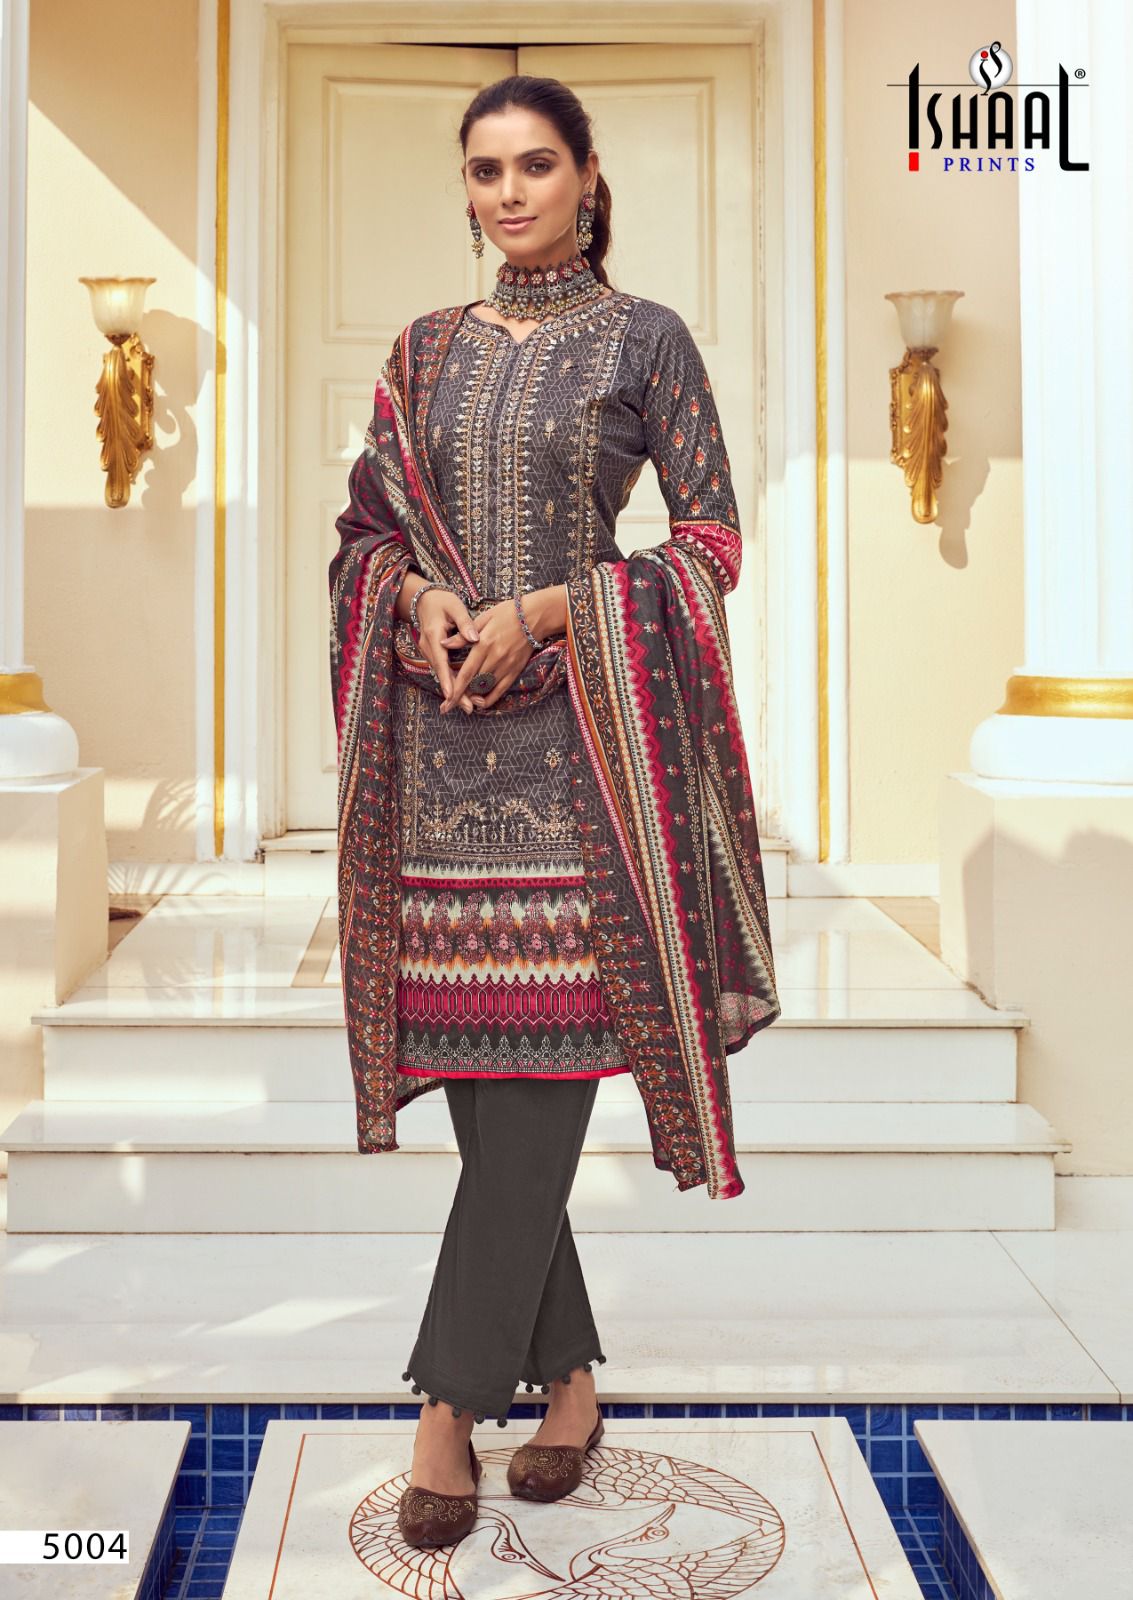 Ishaal Print Embroidered Vol  5 collection 6